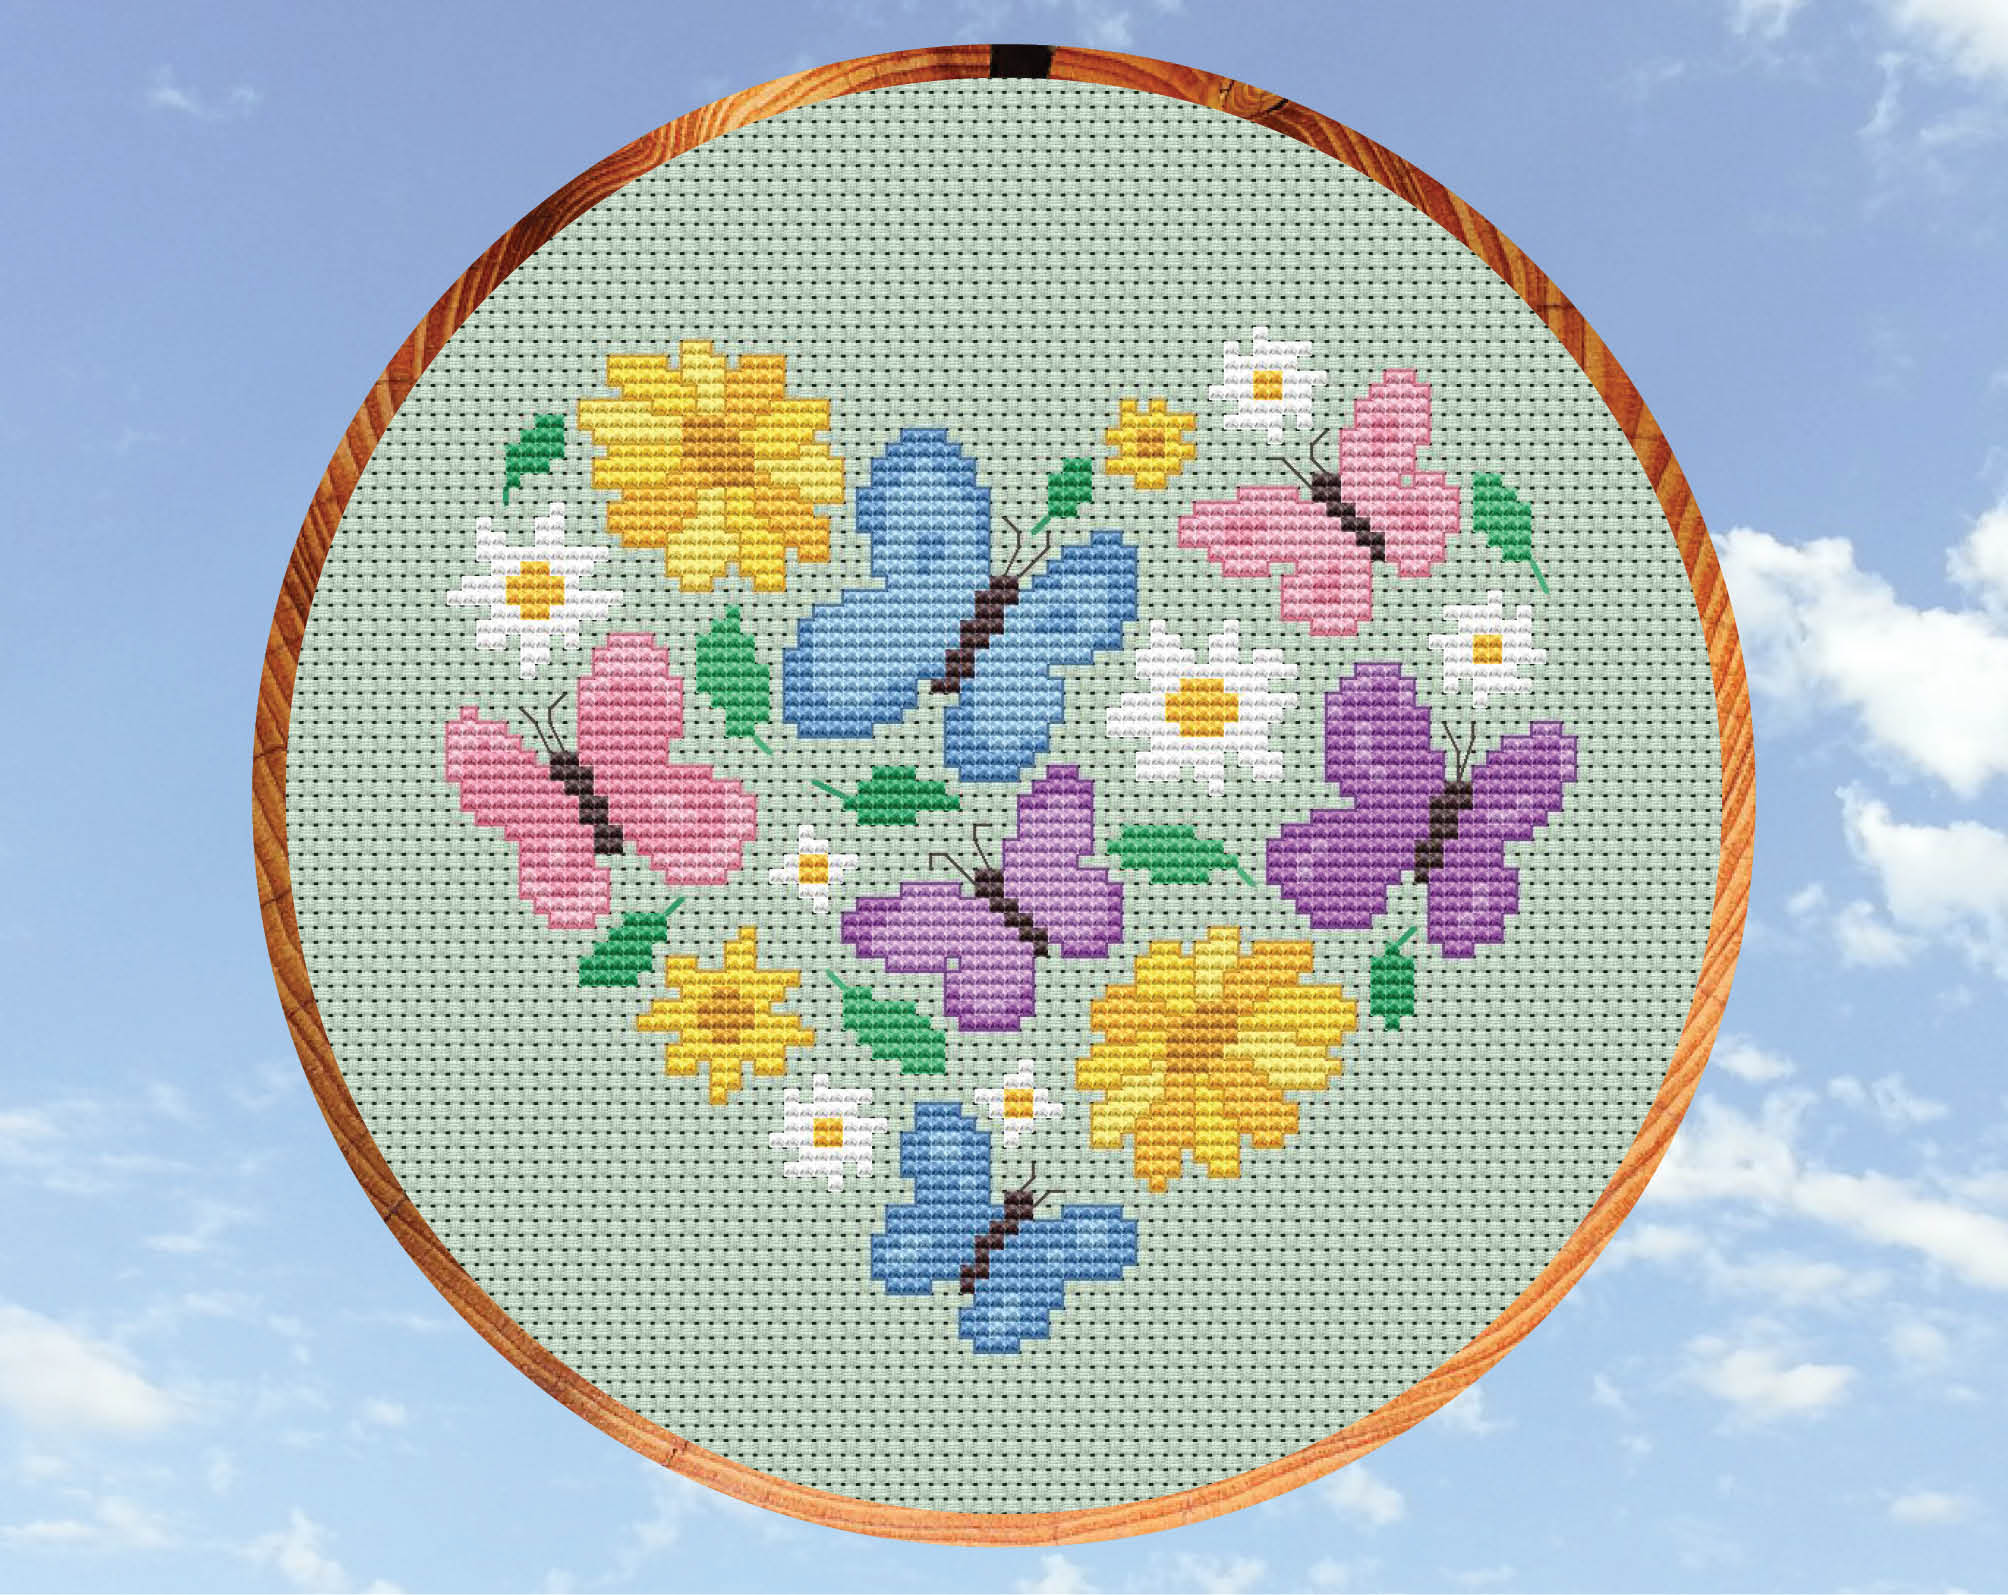 Butterfly Heart cross stitch pattern. Butterflies in pink, purple and blue pastel colours, daisies, yellow flowers and leaves form a heart shape. Shown in hoop.